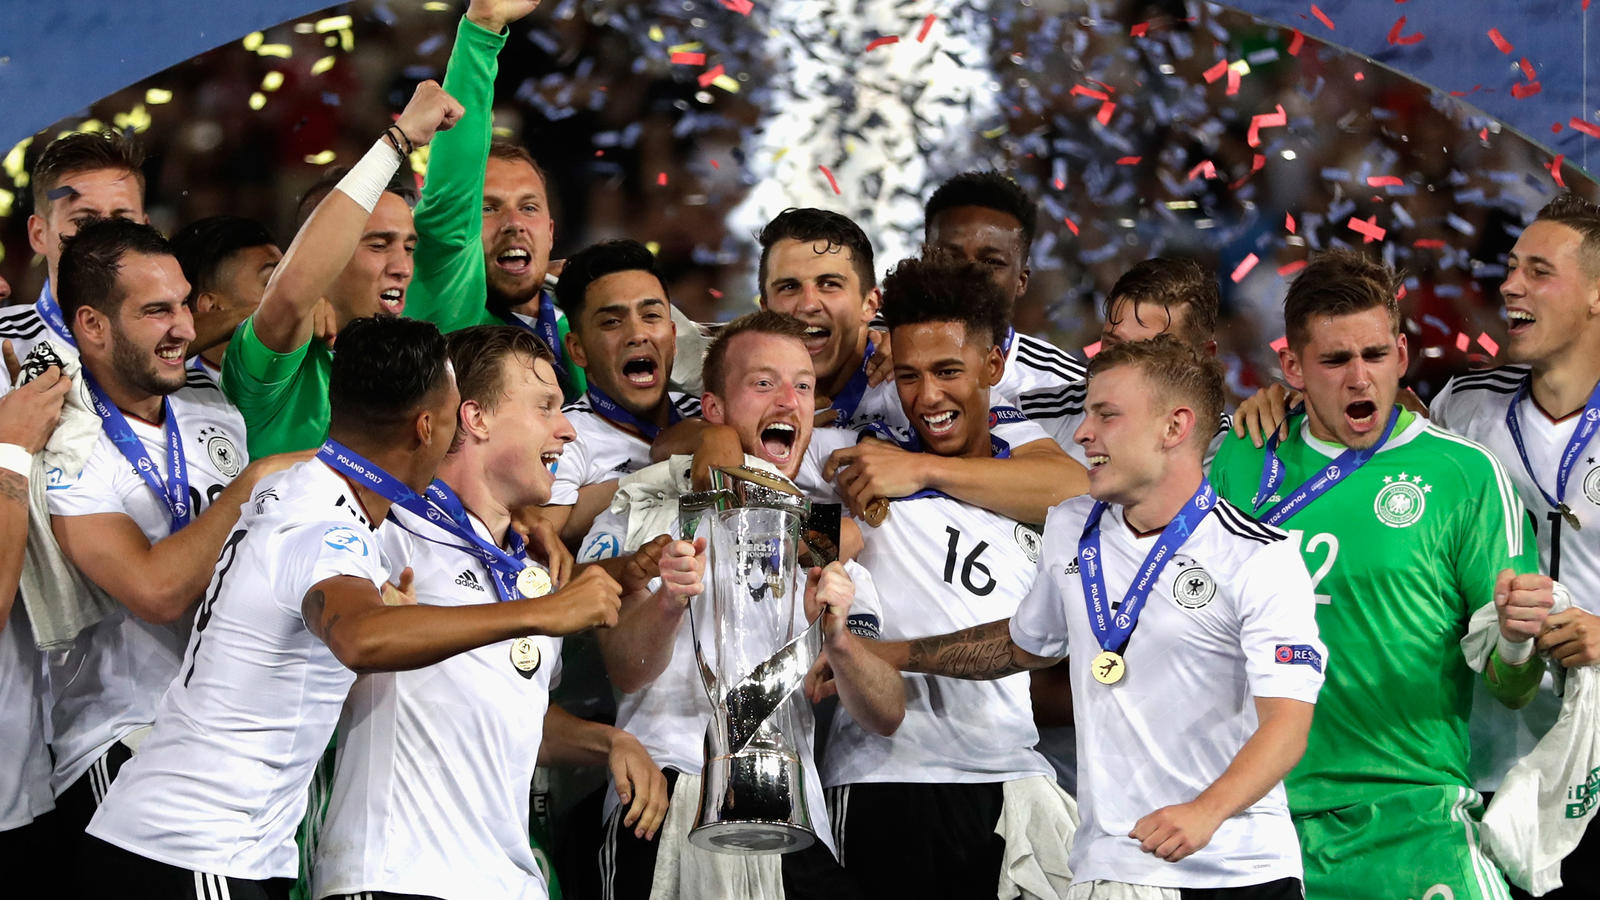 KRAKOW, POLAND - JUNE 30:  Maximilian Arnold of Germany lifts the trophy with his Germany team mates after the UEFA European Under-21 Championship Final between Germany and Spain at Krakow Stadium on June 30, 2017 in Krakow, Poland.  (Photo by Nils P